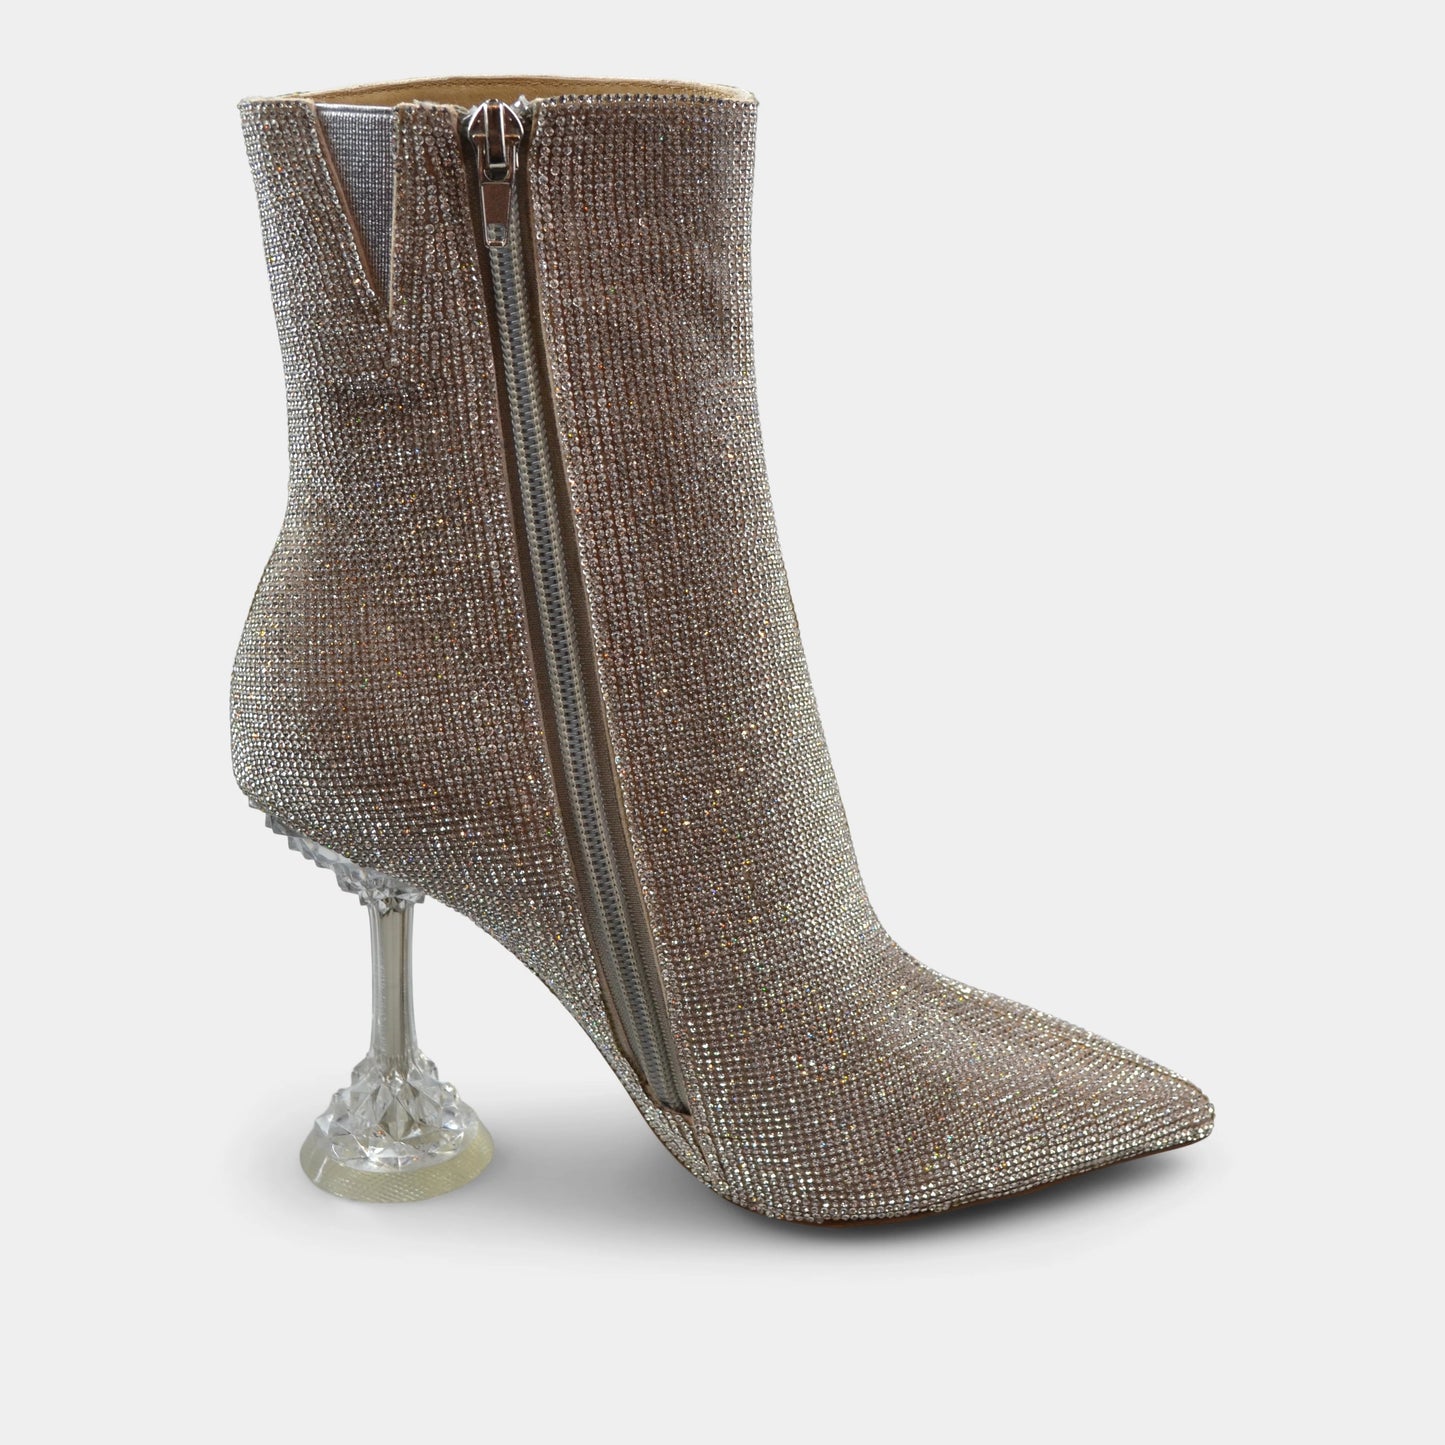 JEFFREY CAMPBELL ENTITY ANKLE HEEL BOOTIE IN SILVER